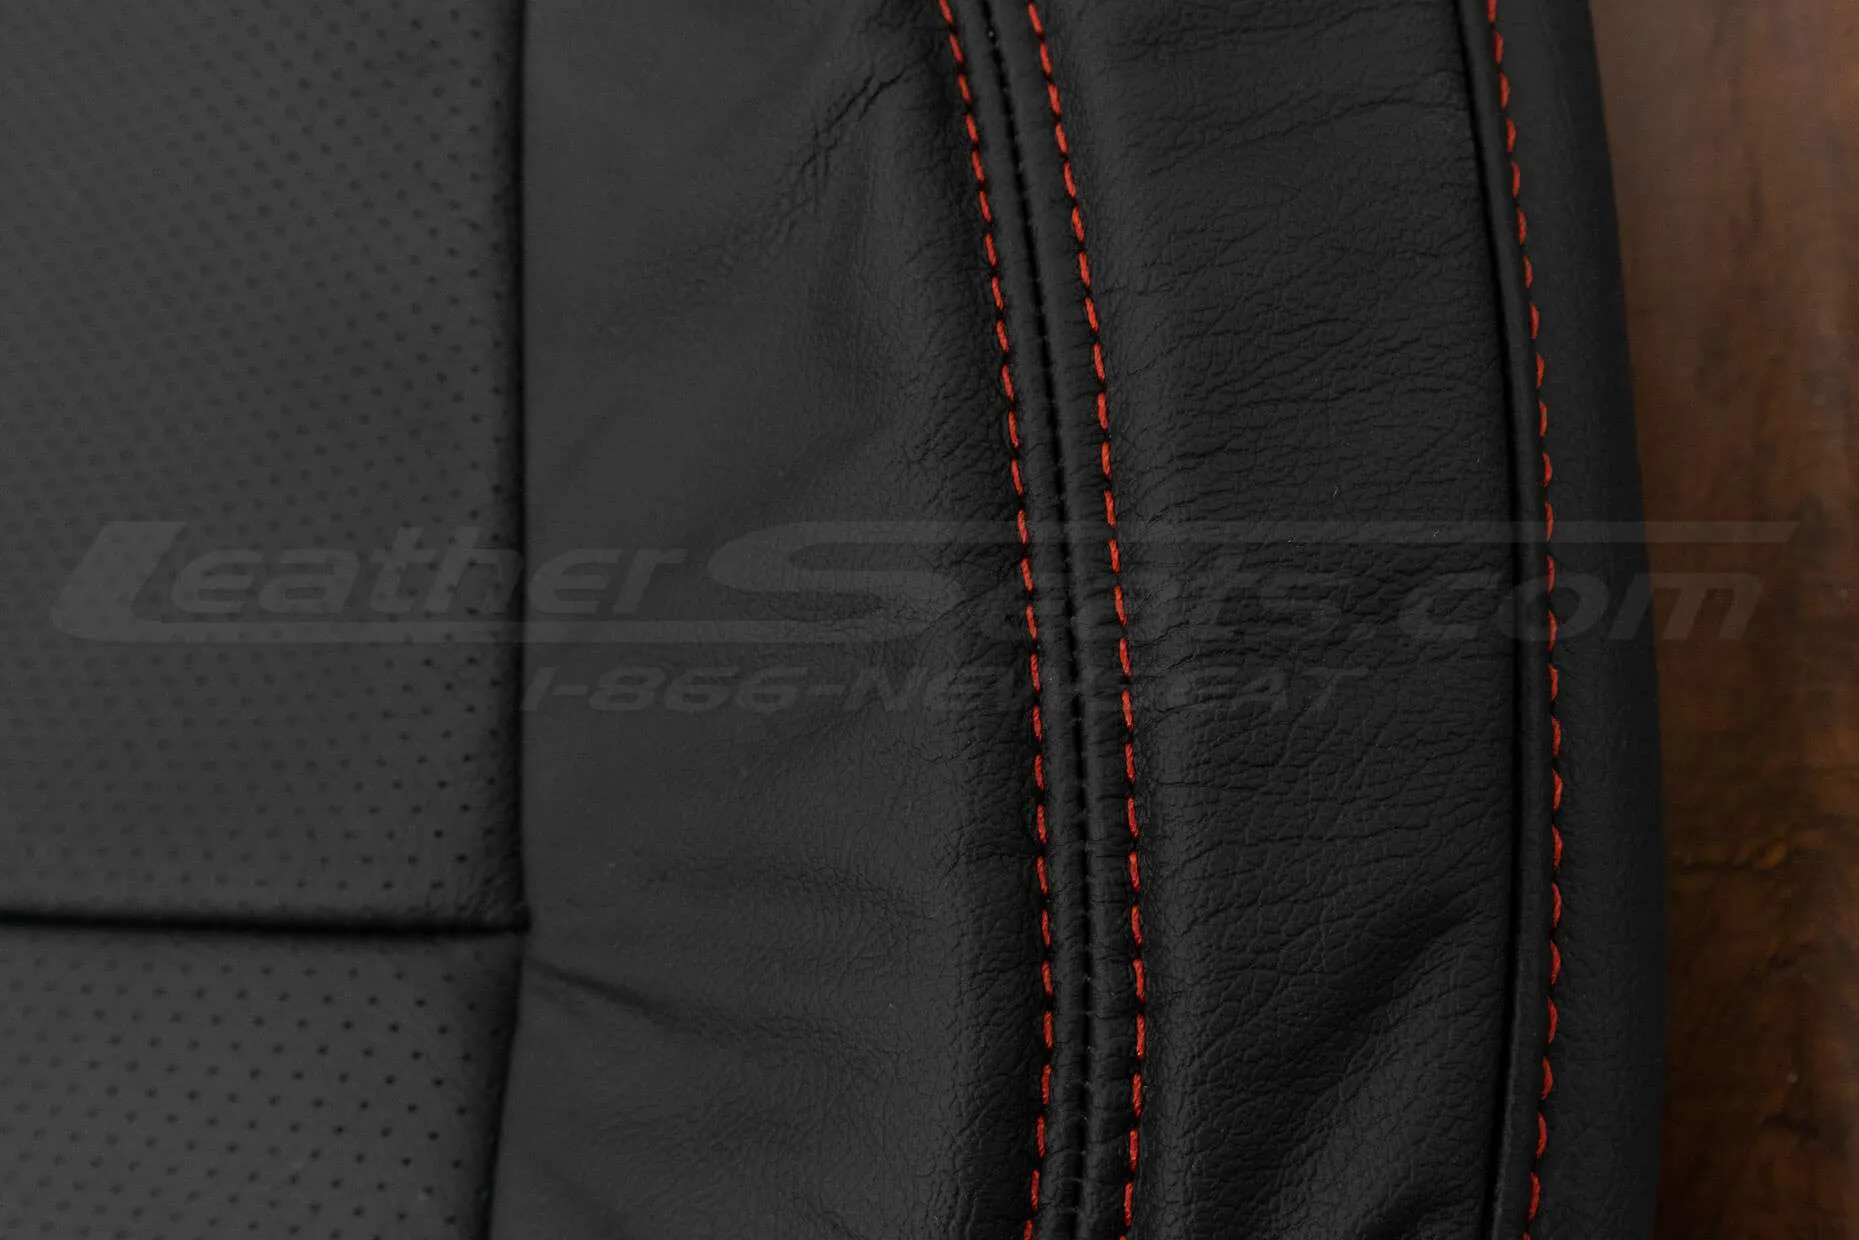 Contrasting Cardinal double-stitching